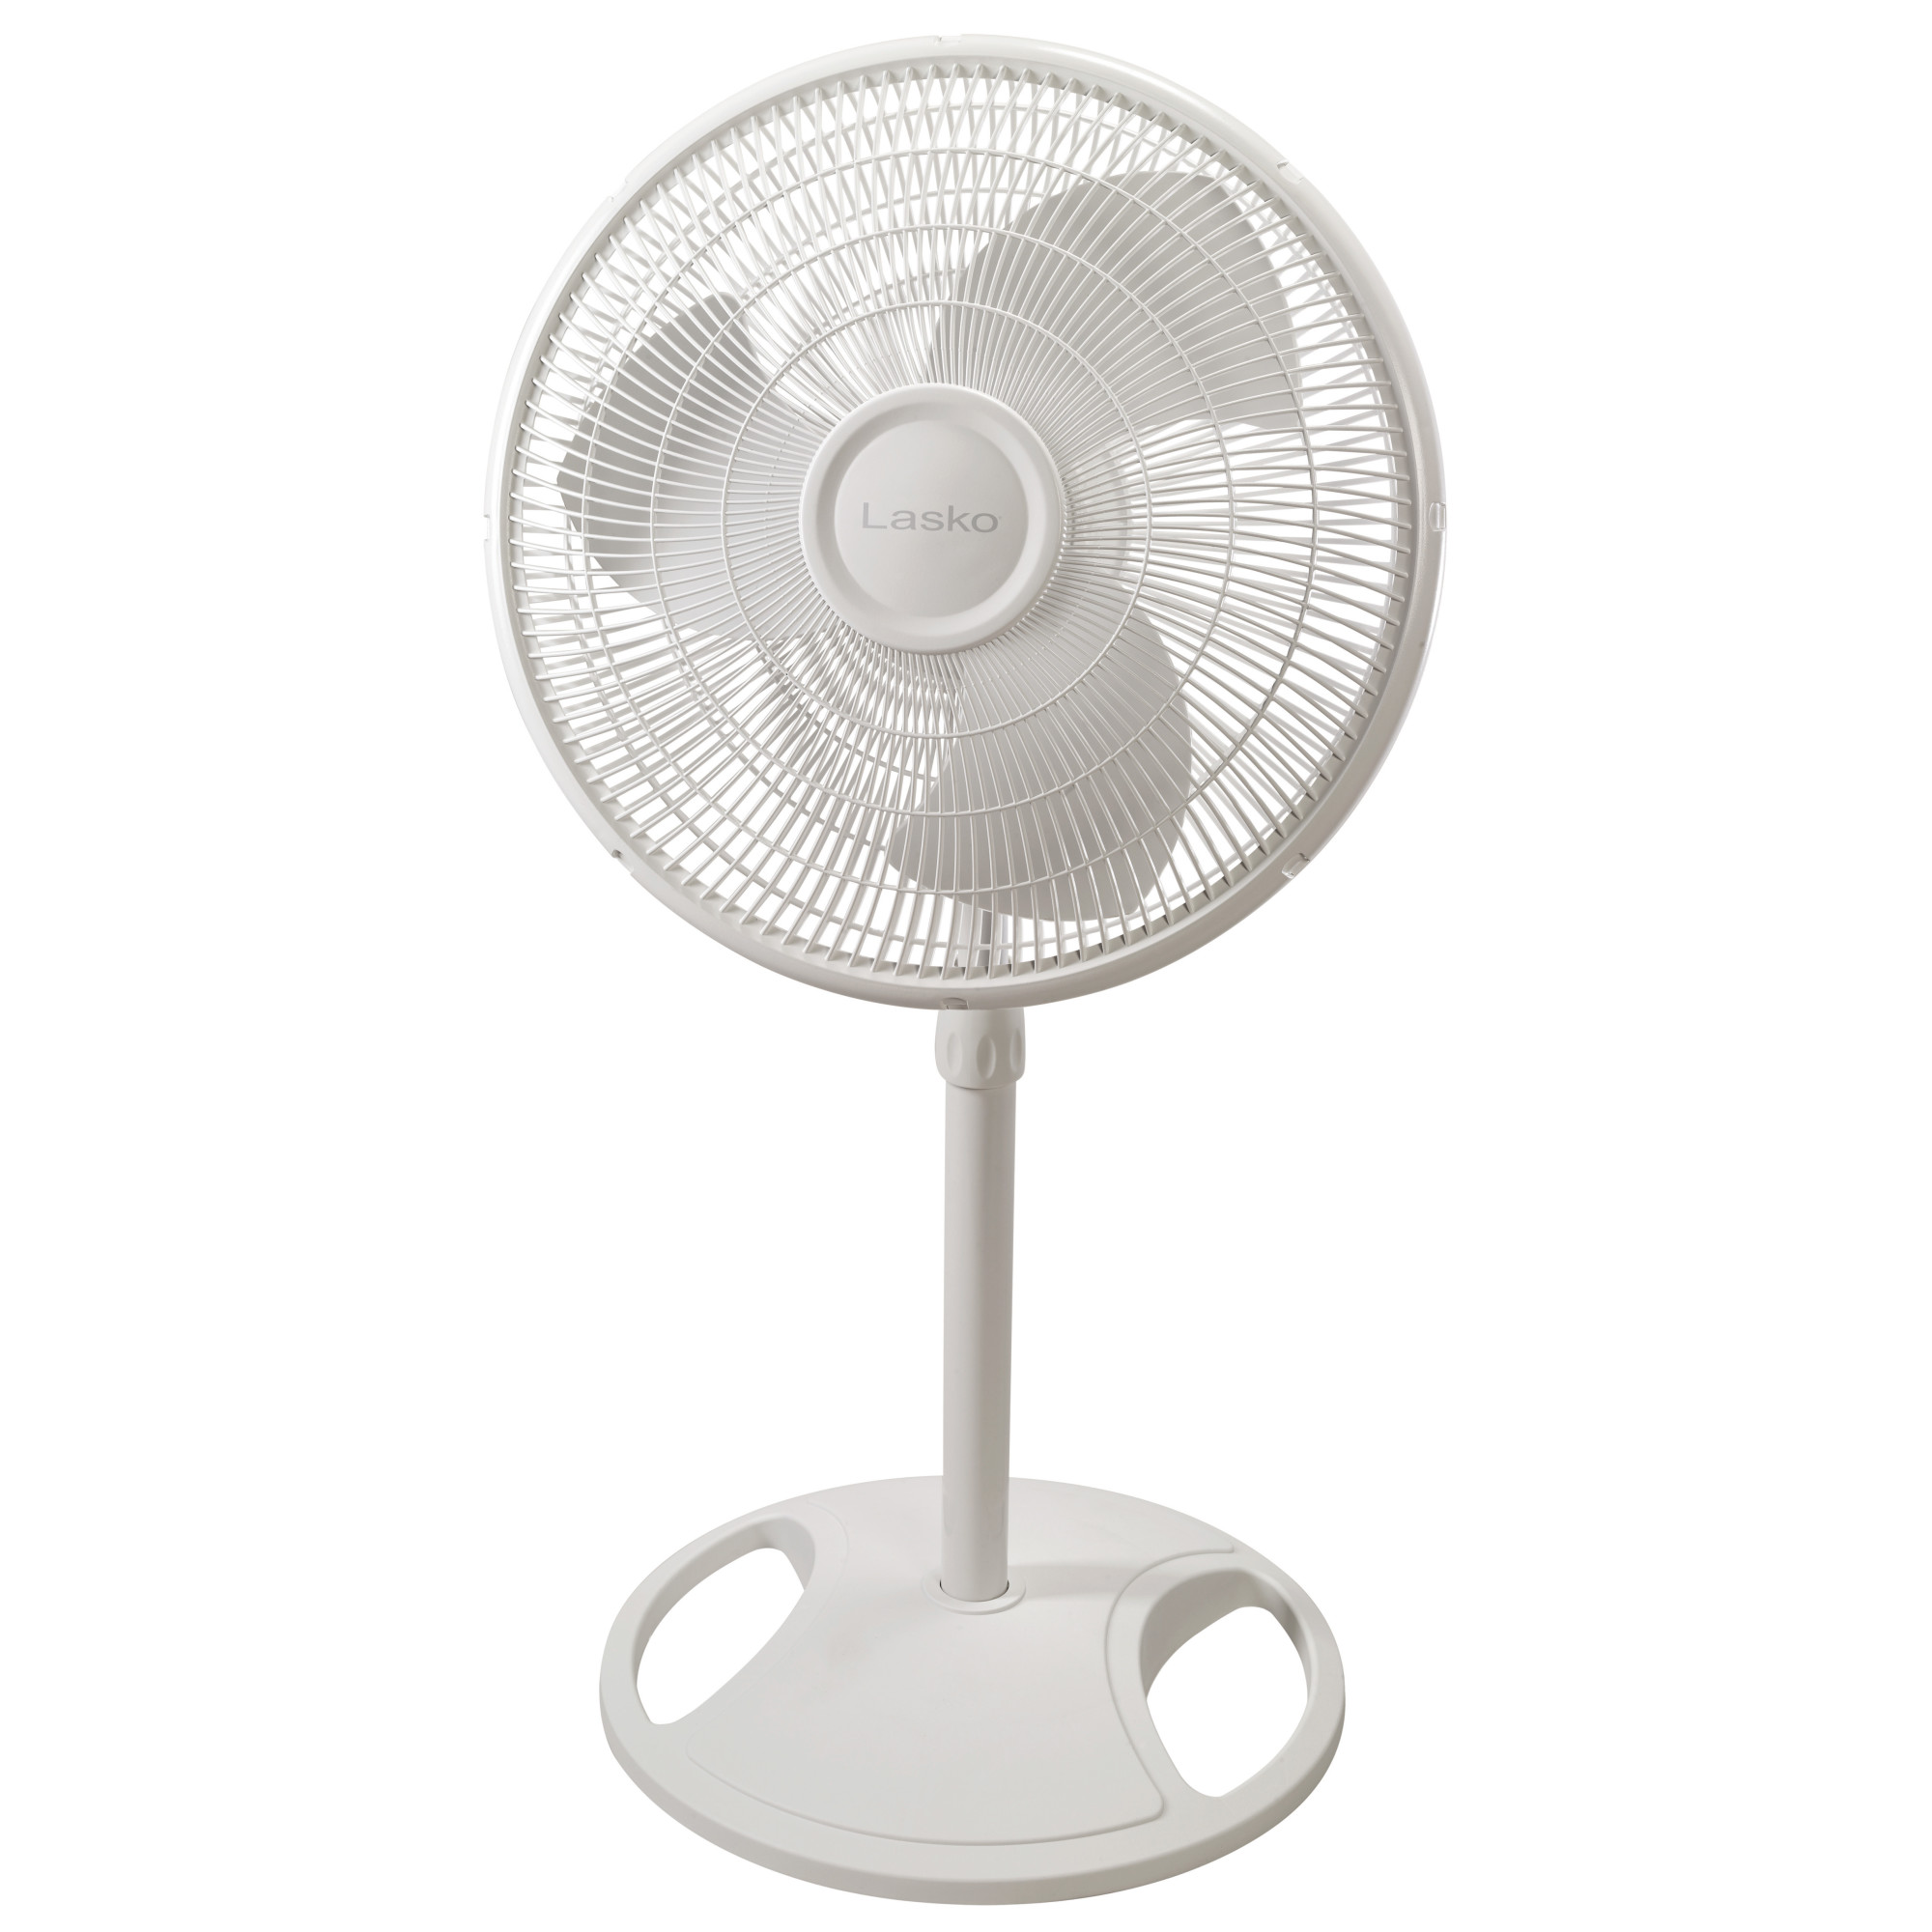 Lasko 16" Oscillating 3-Speed Pedestal Fan with Adjustable Height, 47" H, White, S16200, New - image 5 of 7